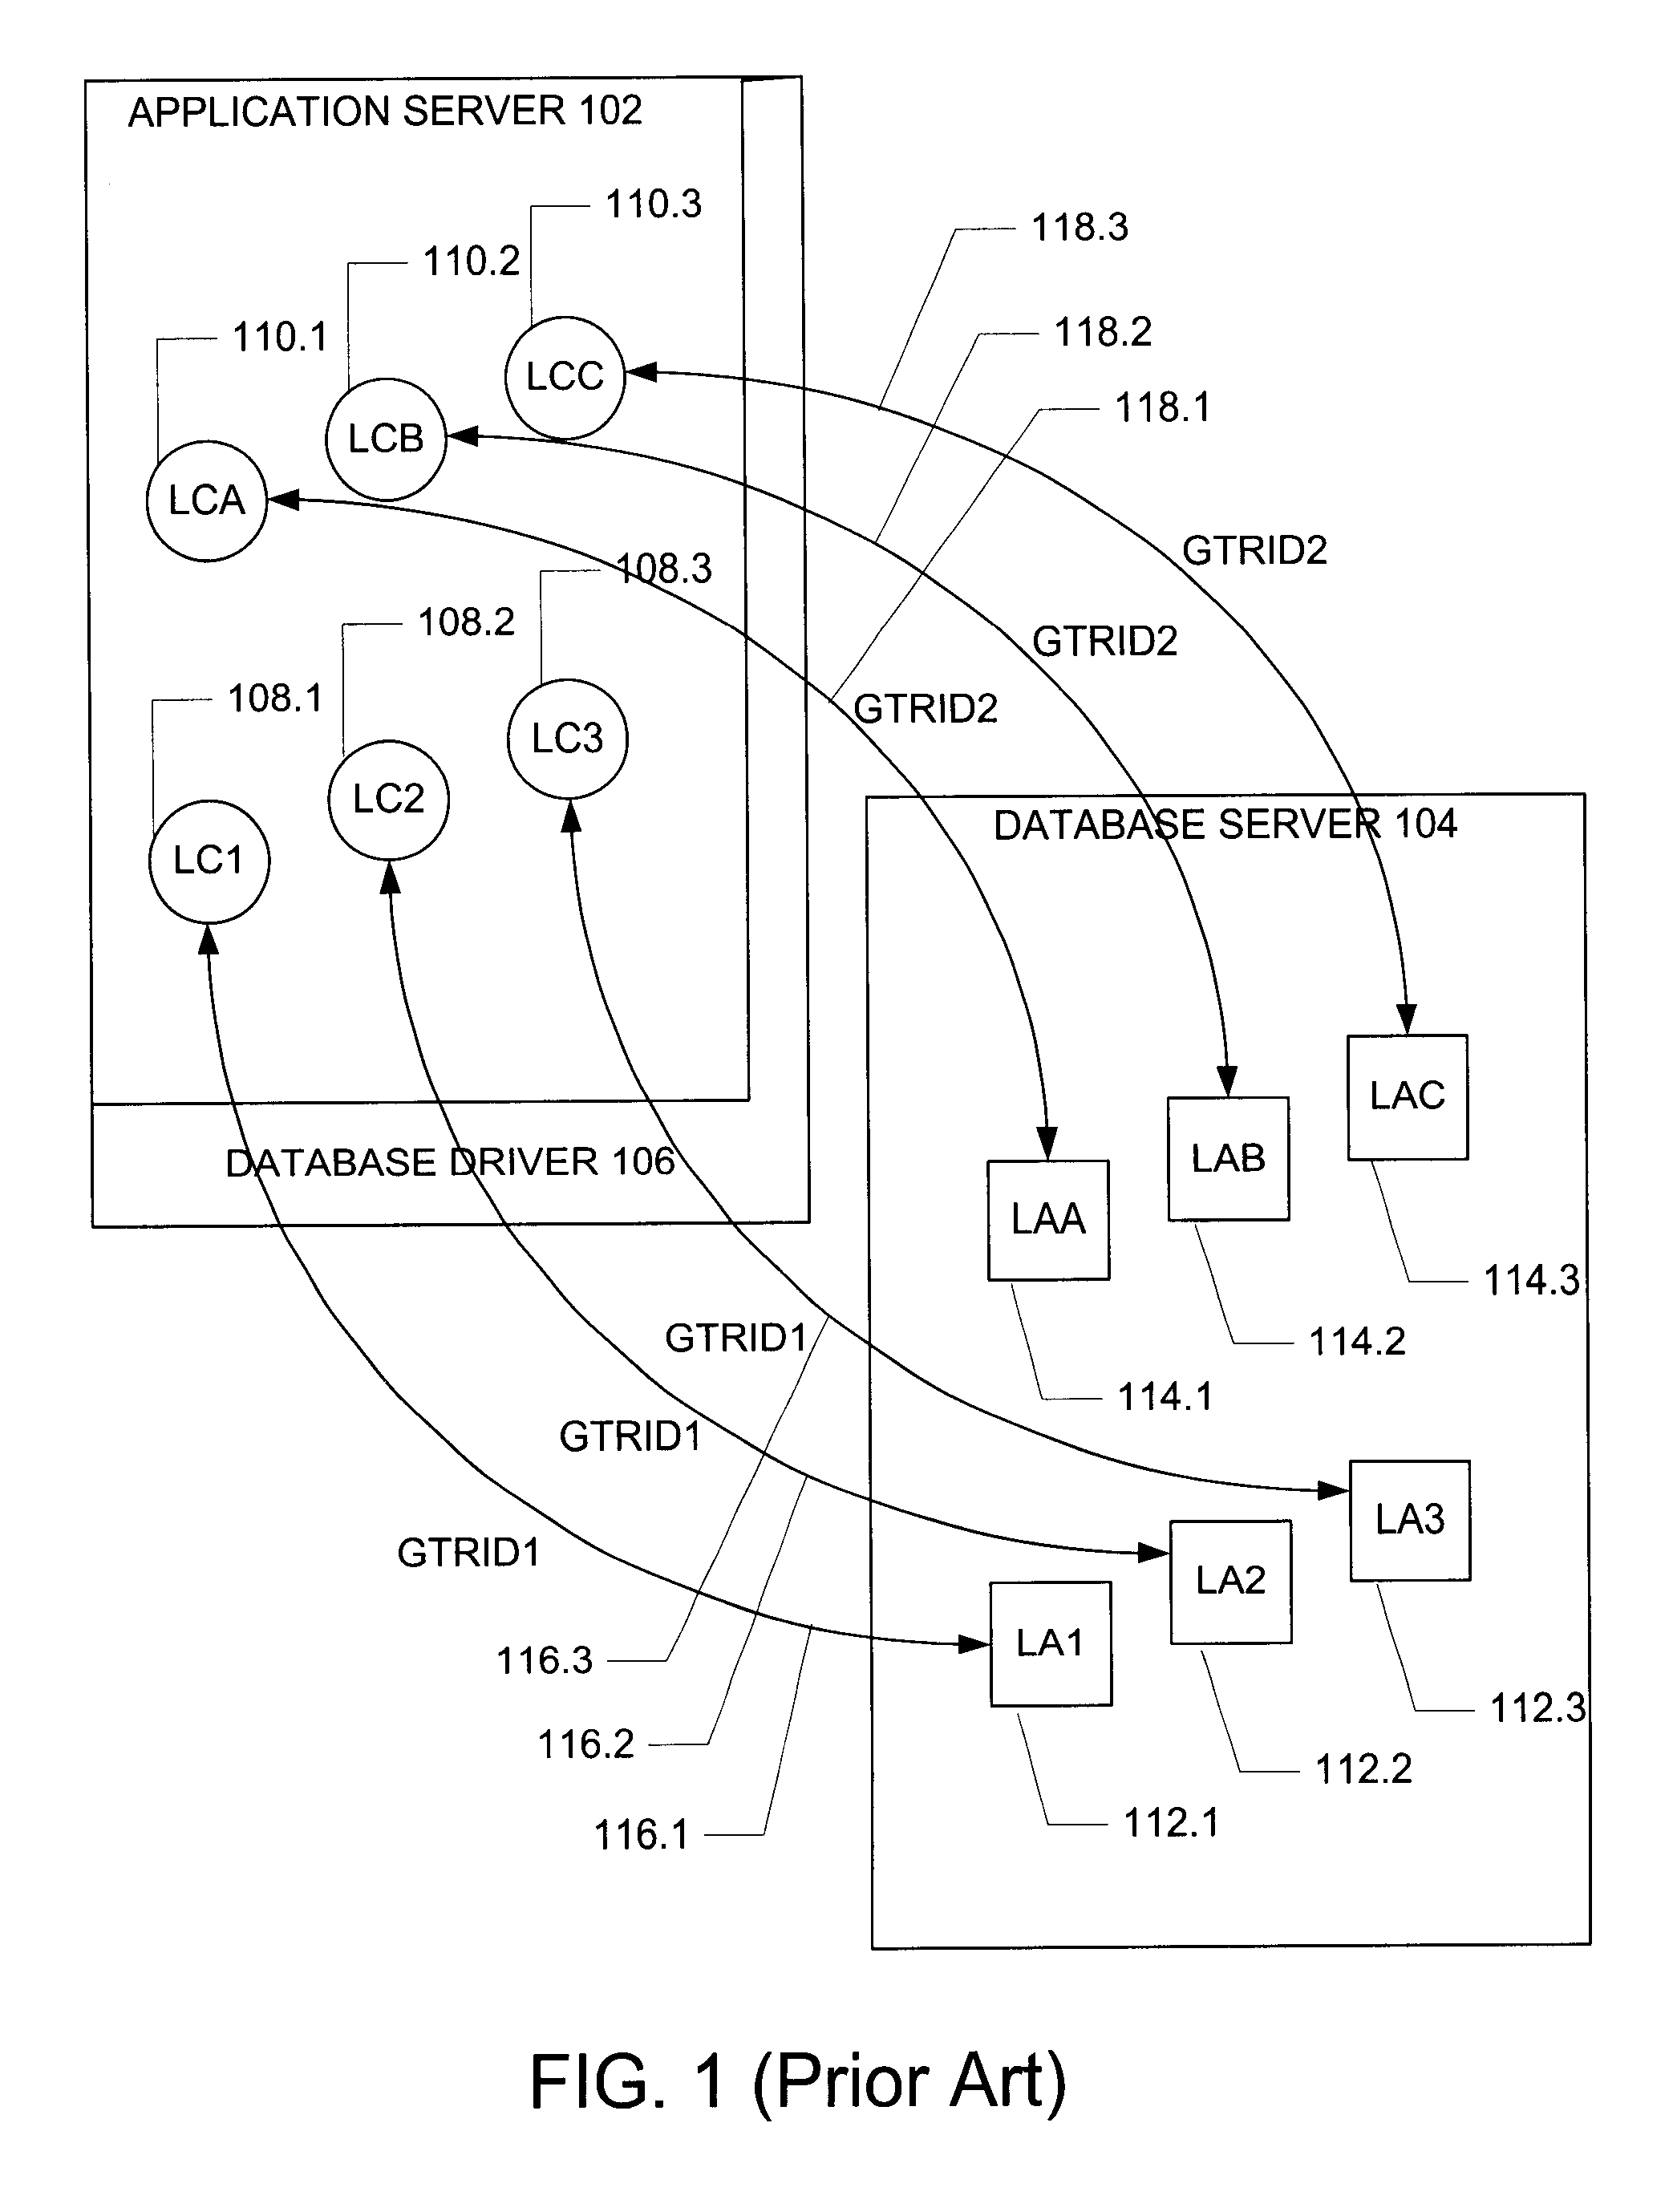 System and method for providing multiple virtual database connections in a relational database system